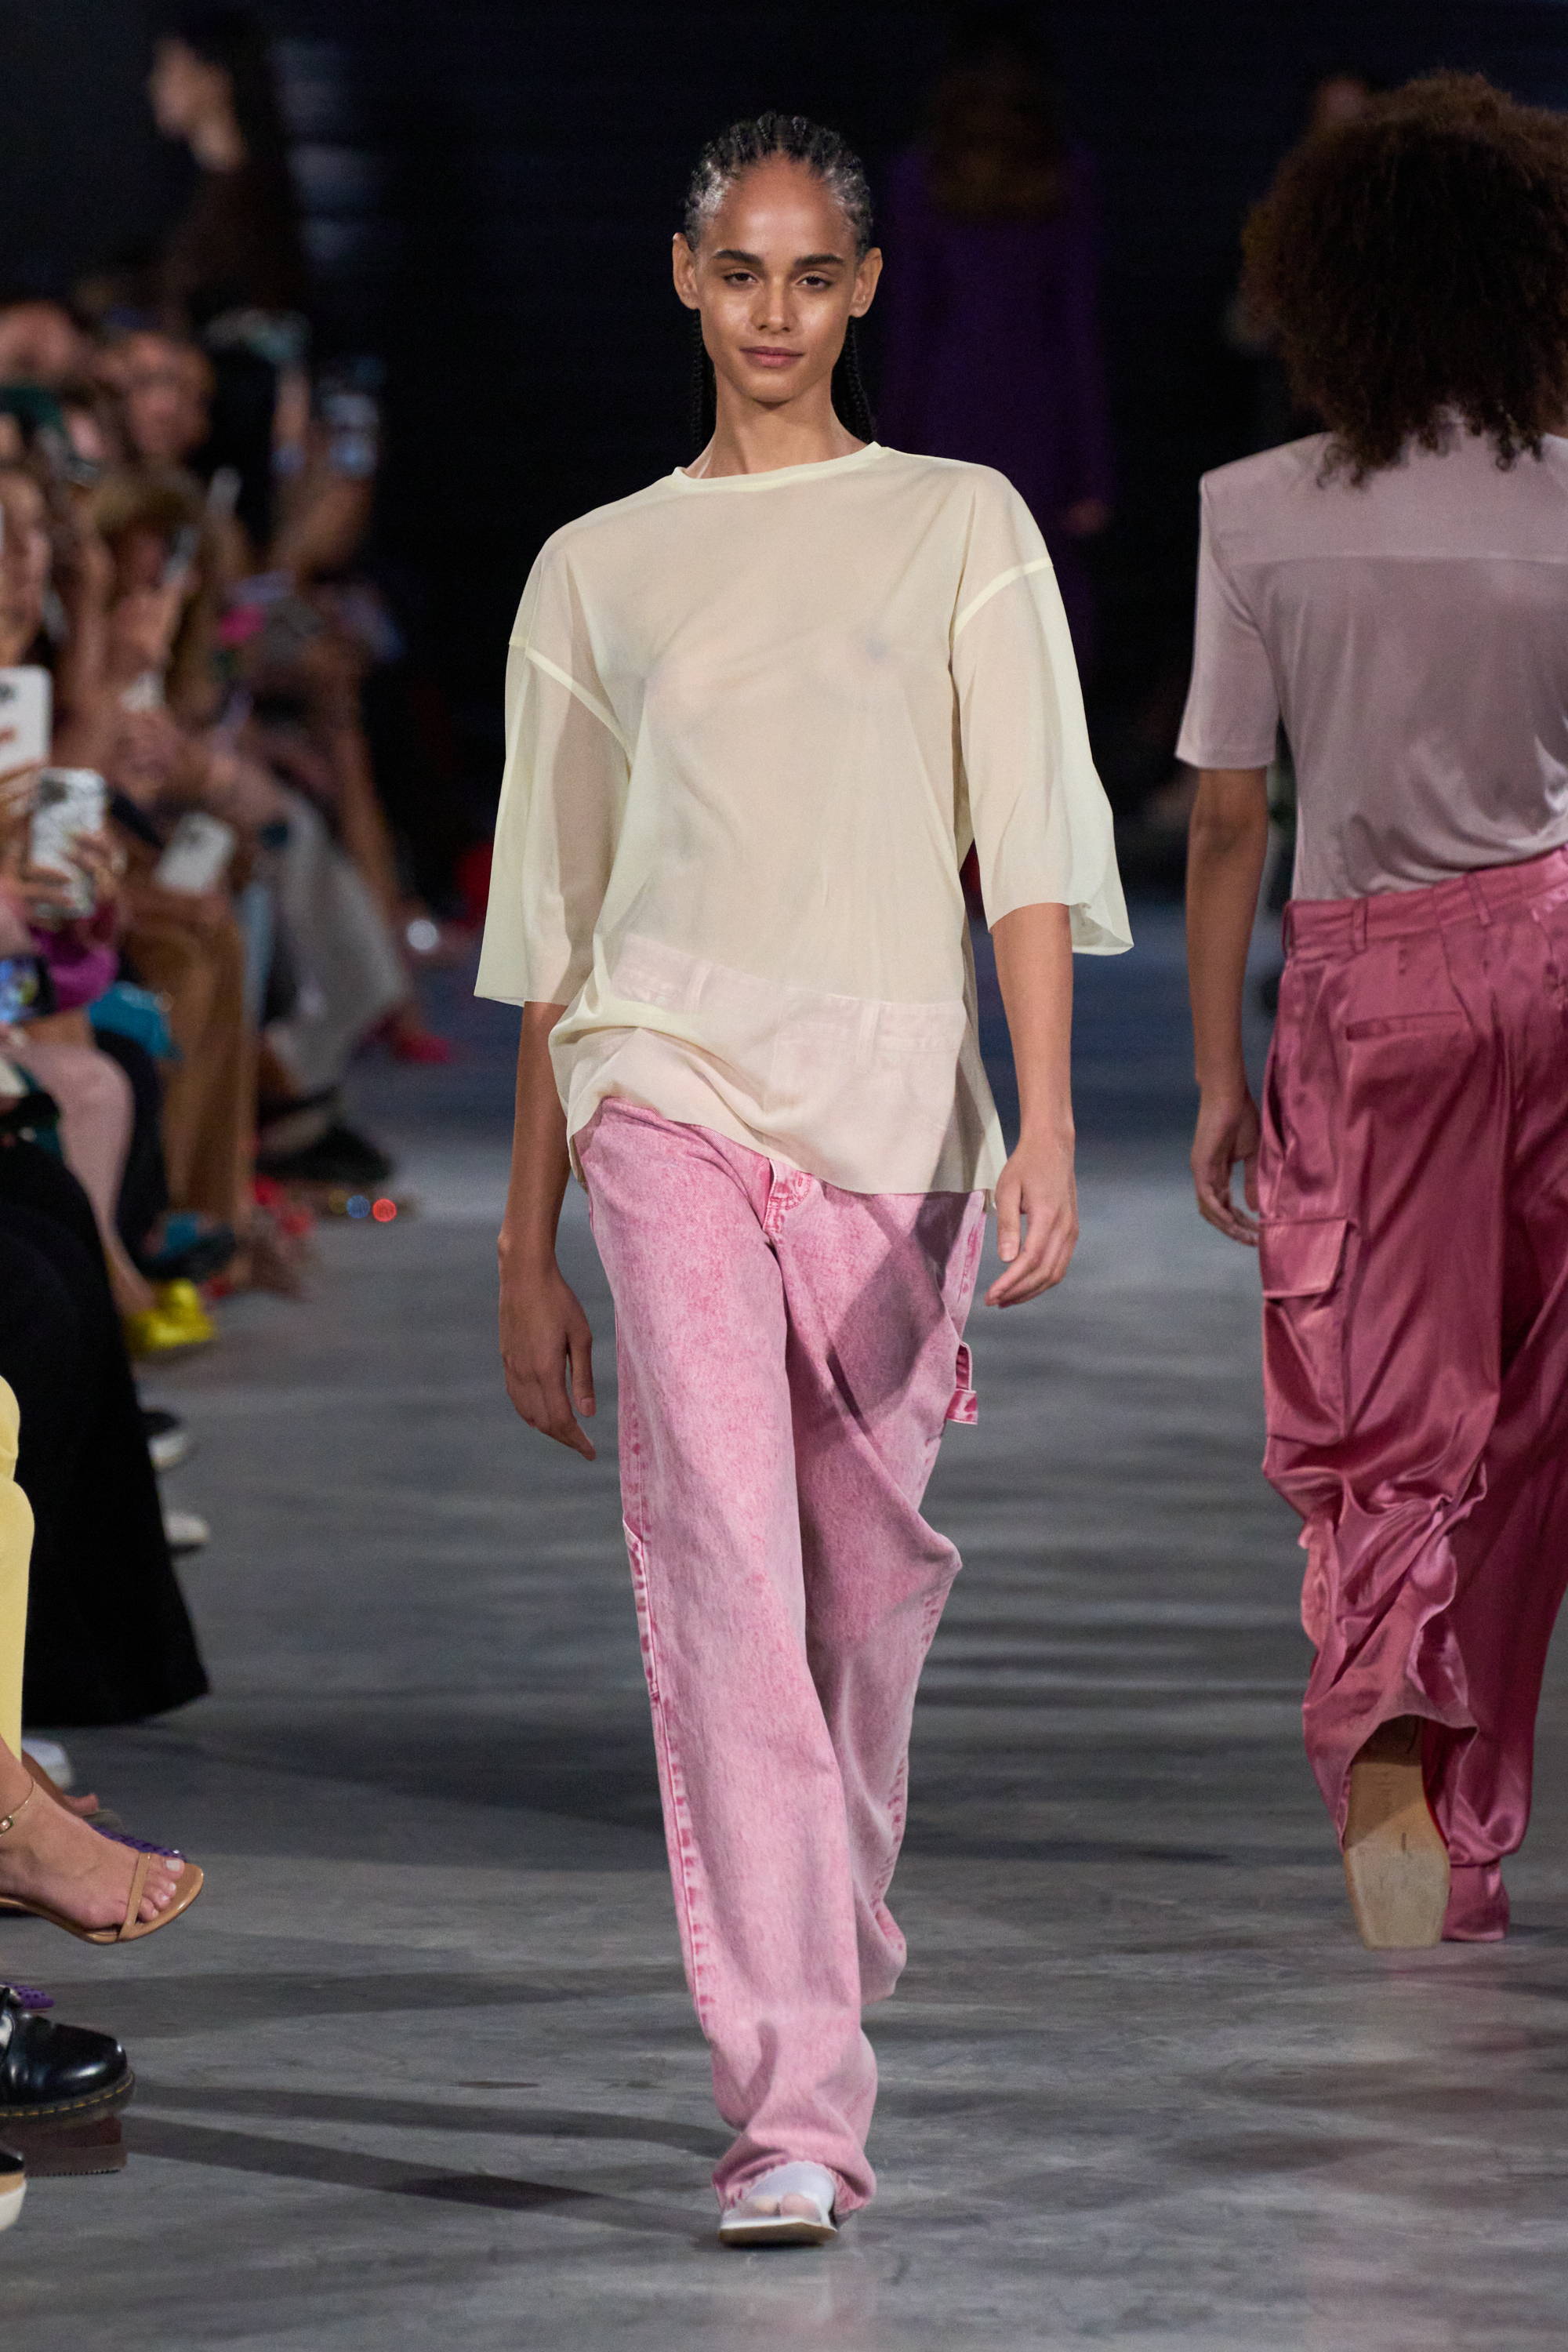 Model on a runway wearing sheer t shirt and jeans